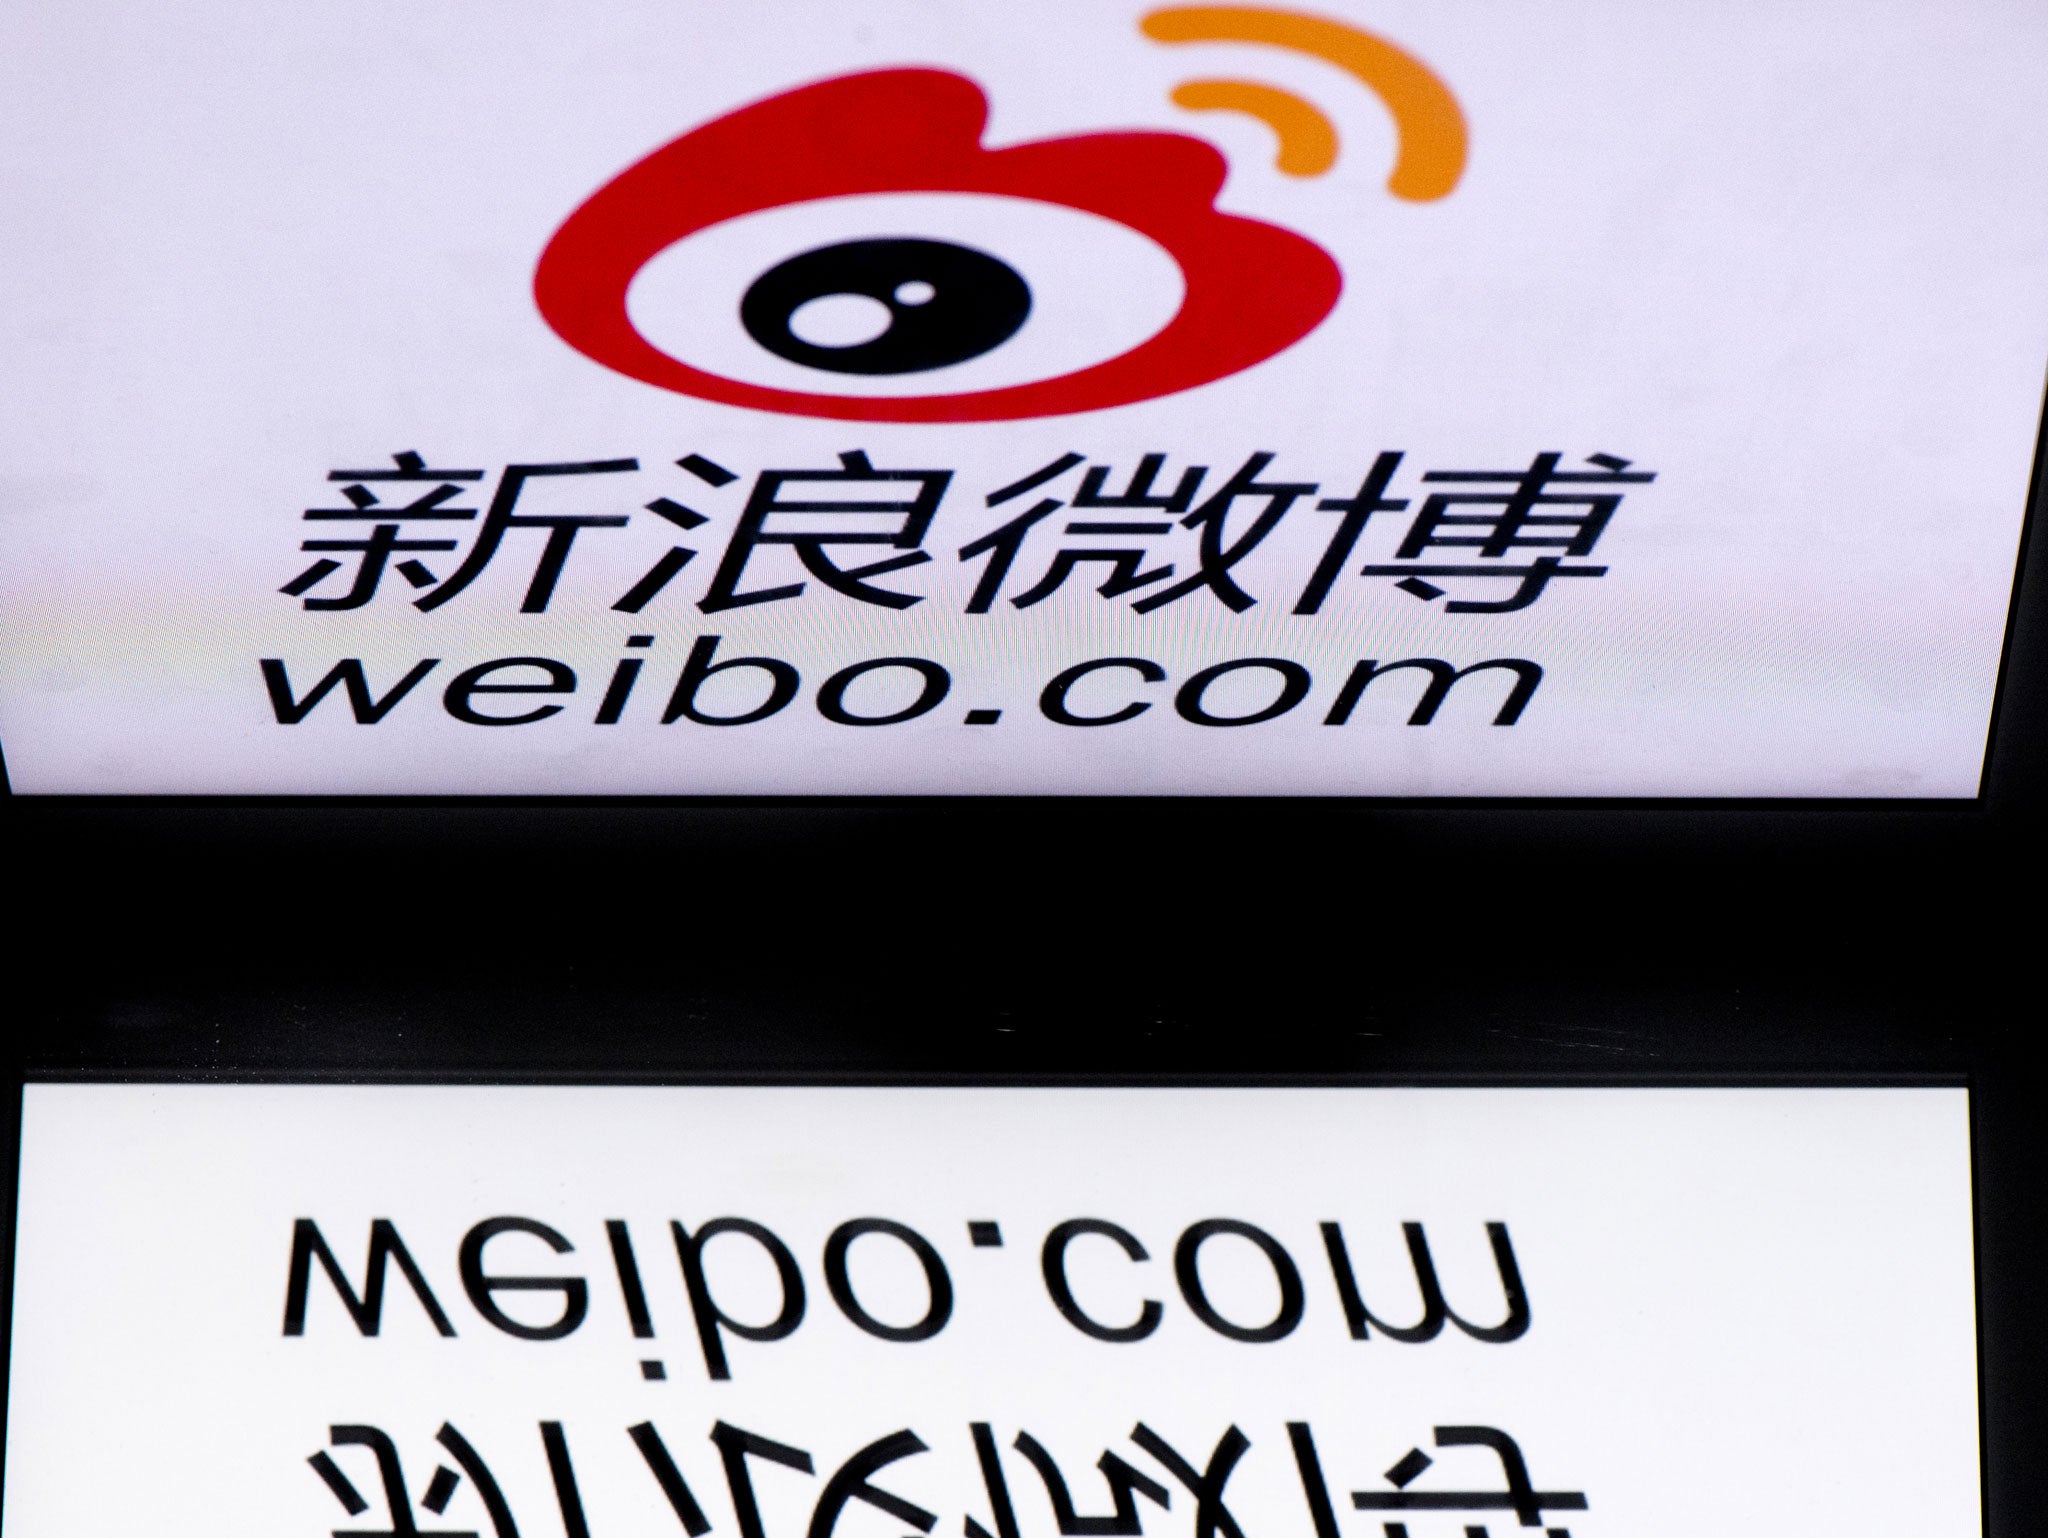 China's homegrown social media sites like Weibo are booming thanks to their better knowledge of the world's largest Internet market,